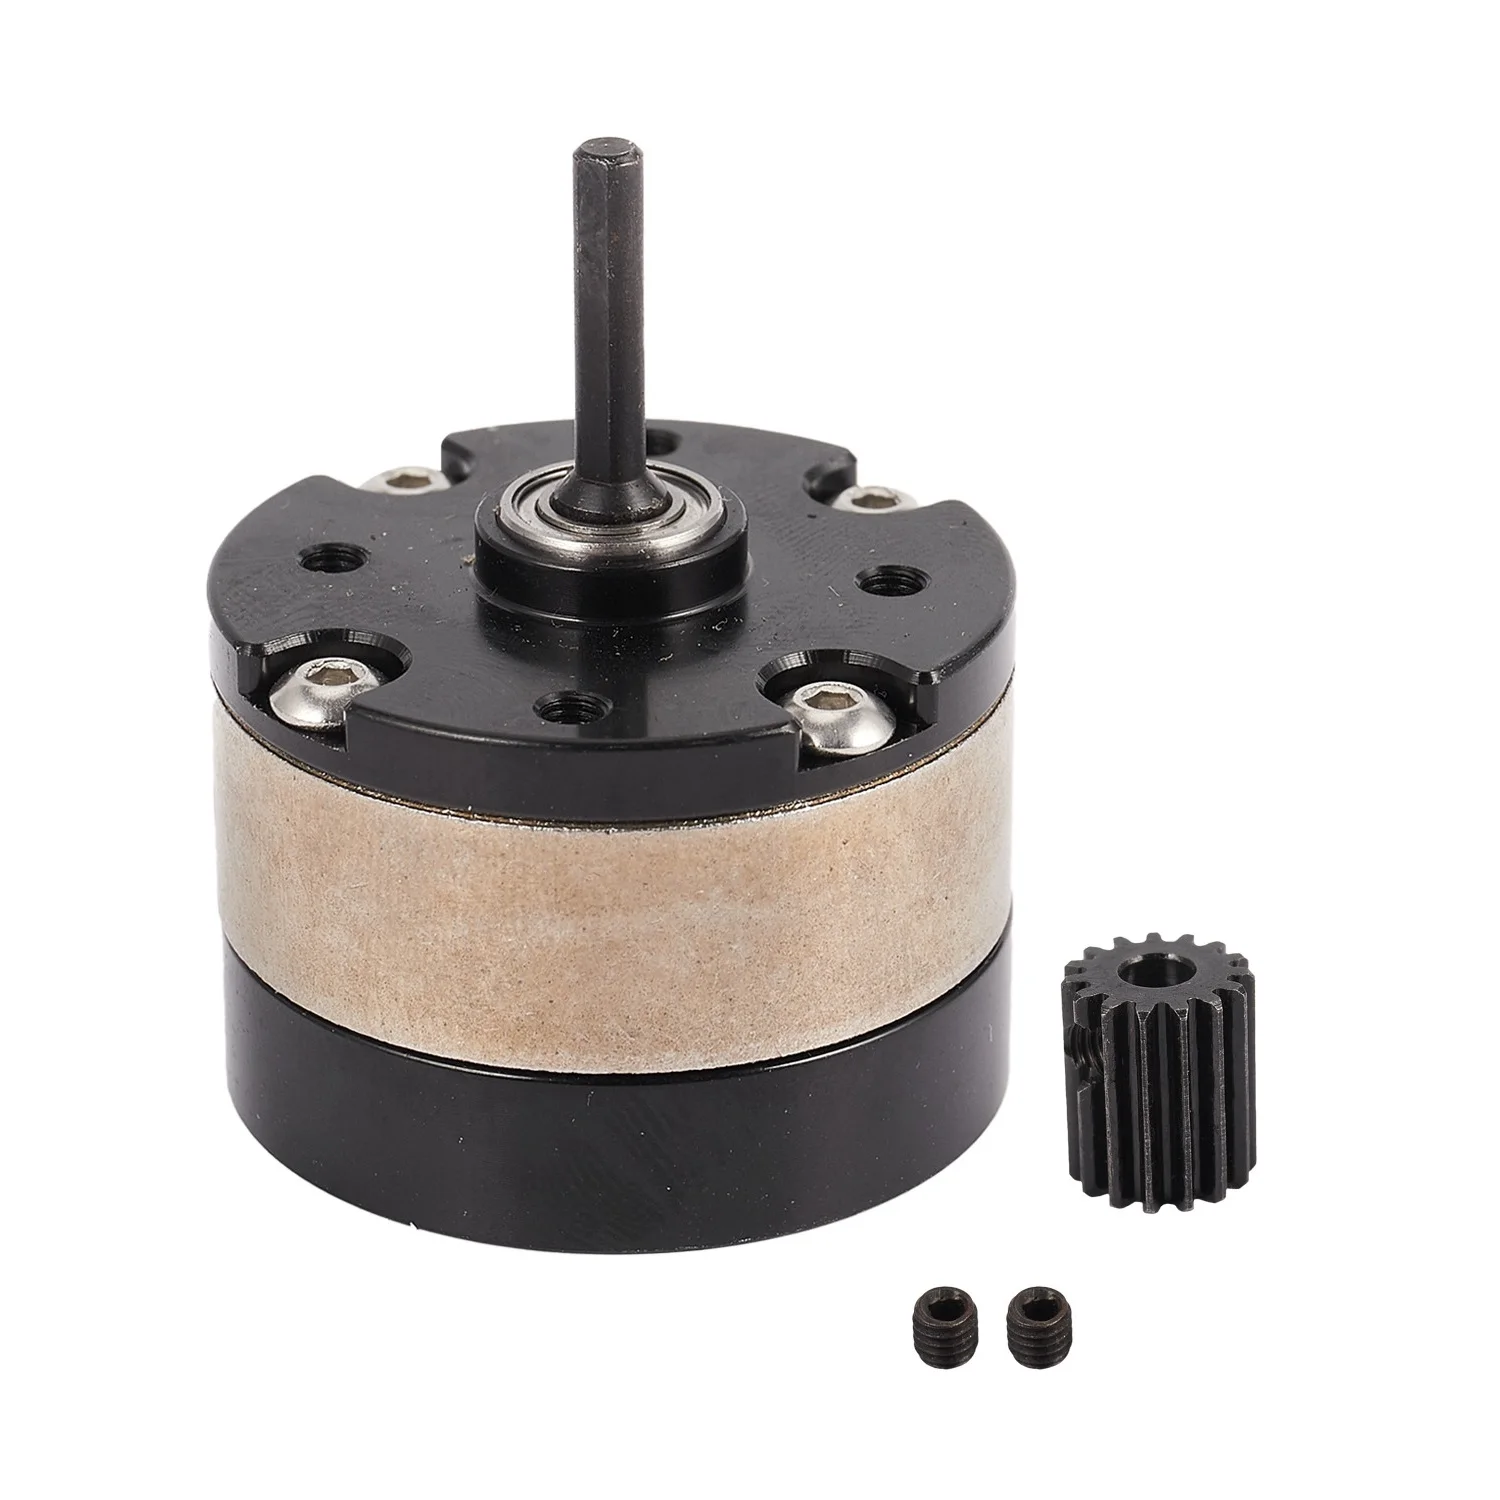 

Metal 1:3 Ratio Reducer Planetary Gearbox Transmission Box for 1/10 RC Crawler Car Axial SCX10 RC Car 540 550 Motor Parts